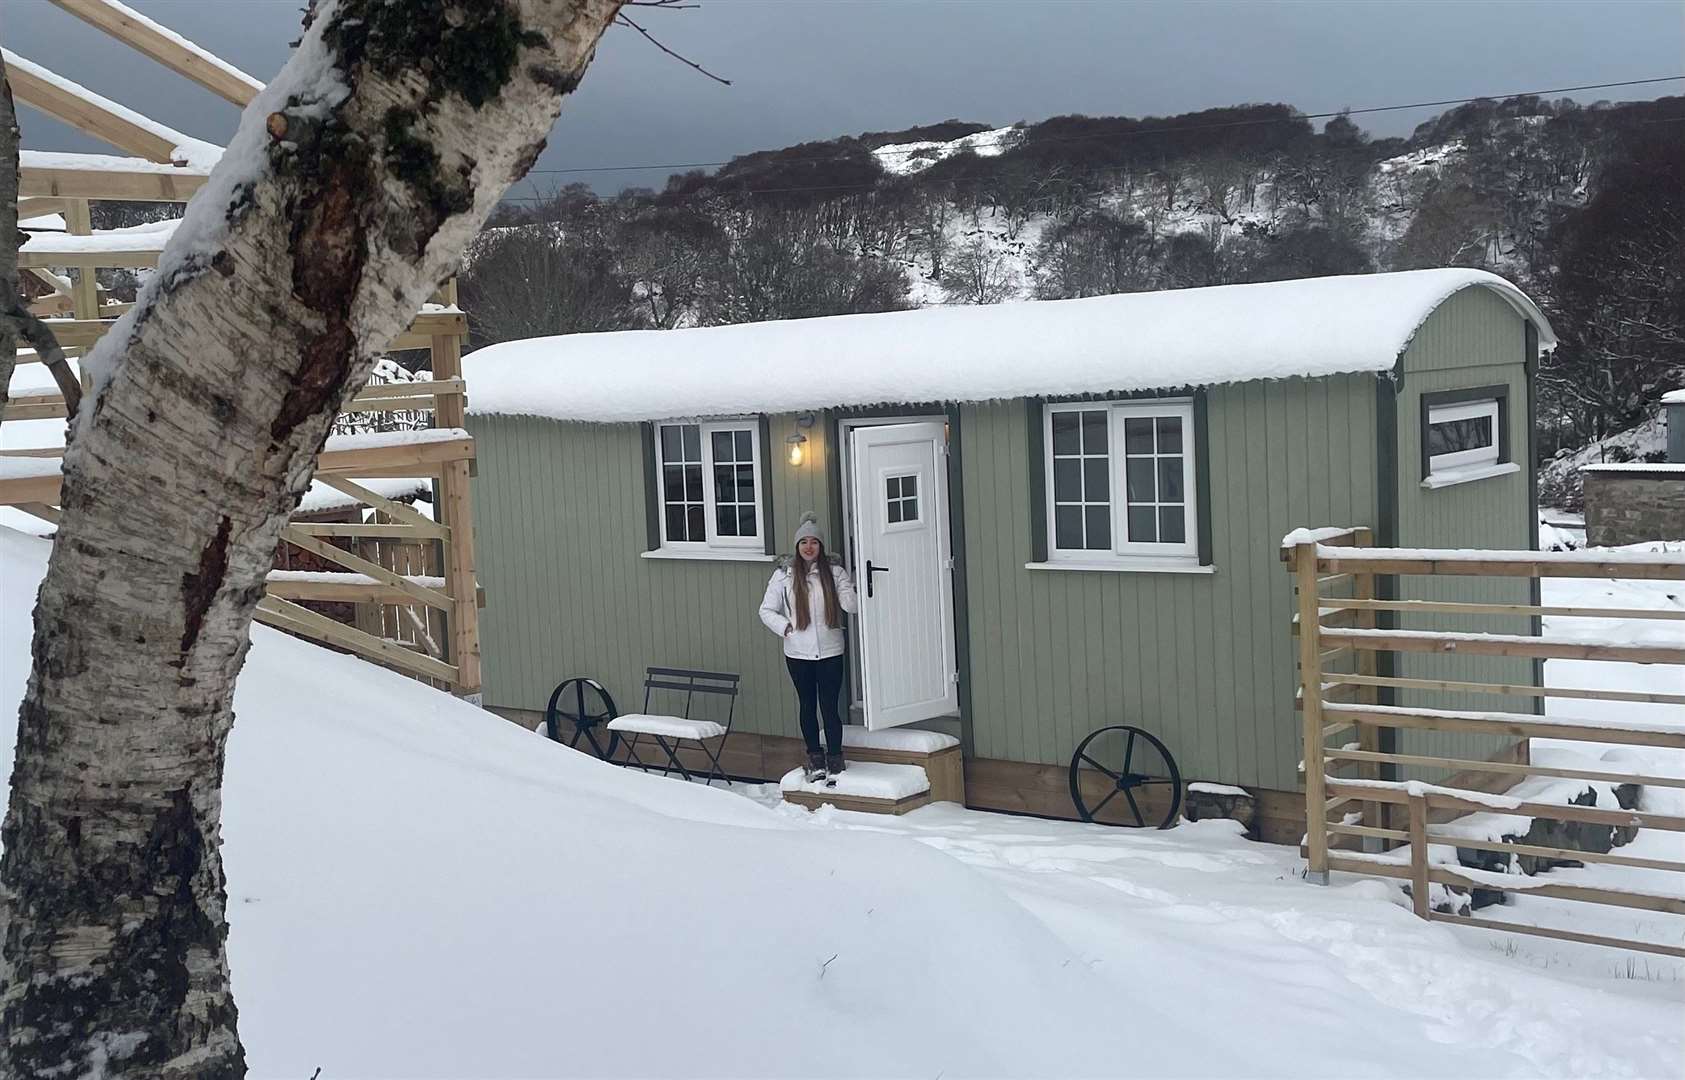 Isobel Wright will be opening Ardmore Shepherd’s Hut to holidaymakers this spring.